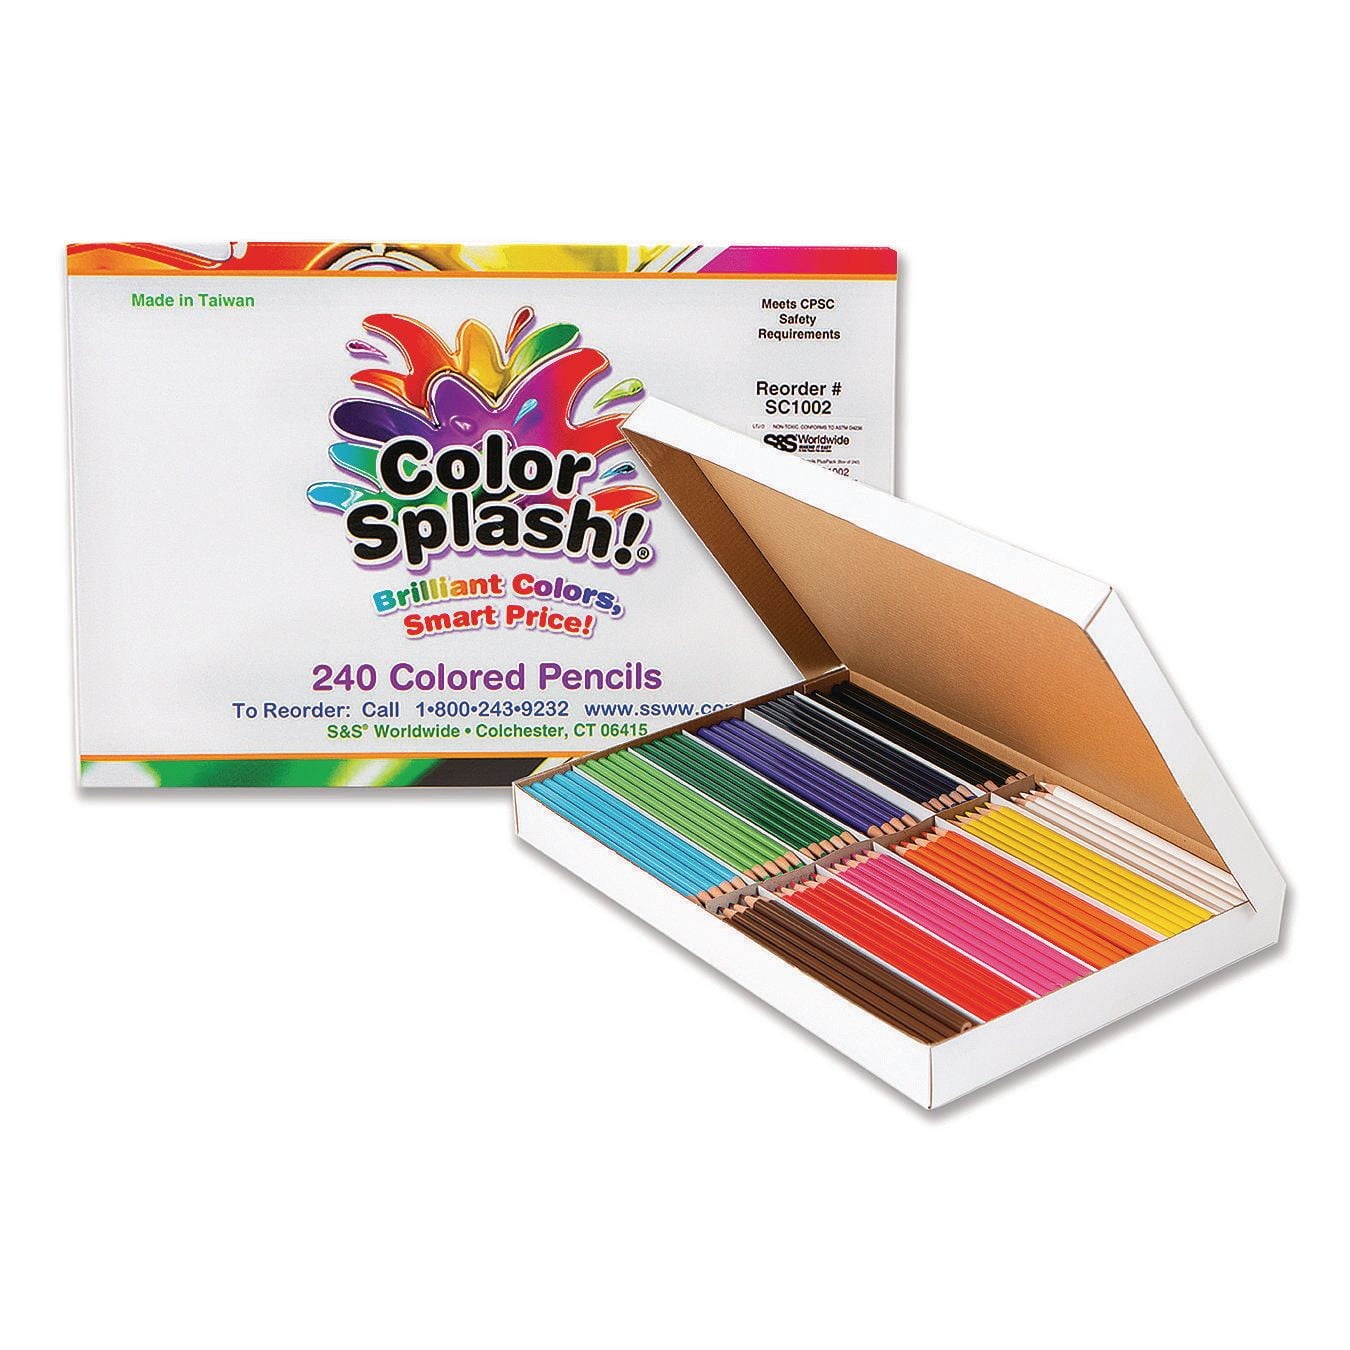 Buy Prismacolor® Complete Coloring Set at S&S Worldwide